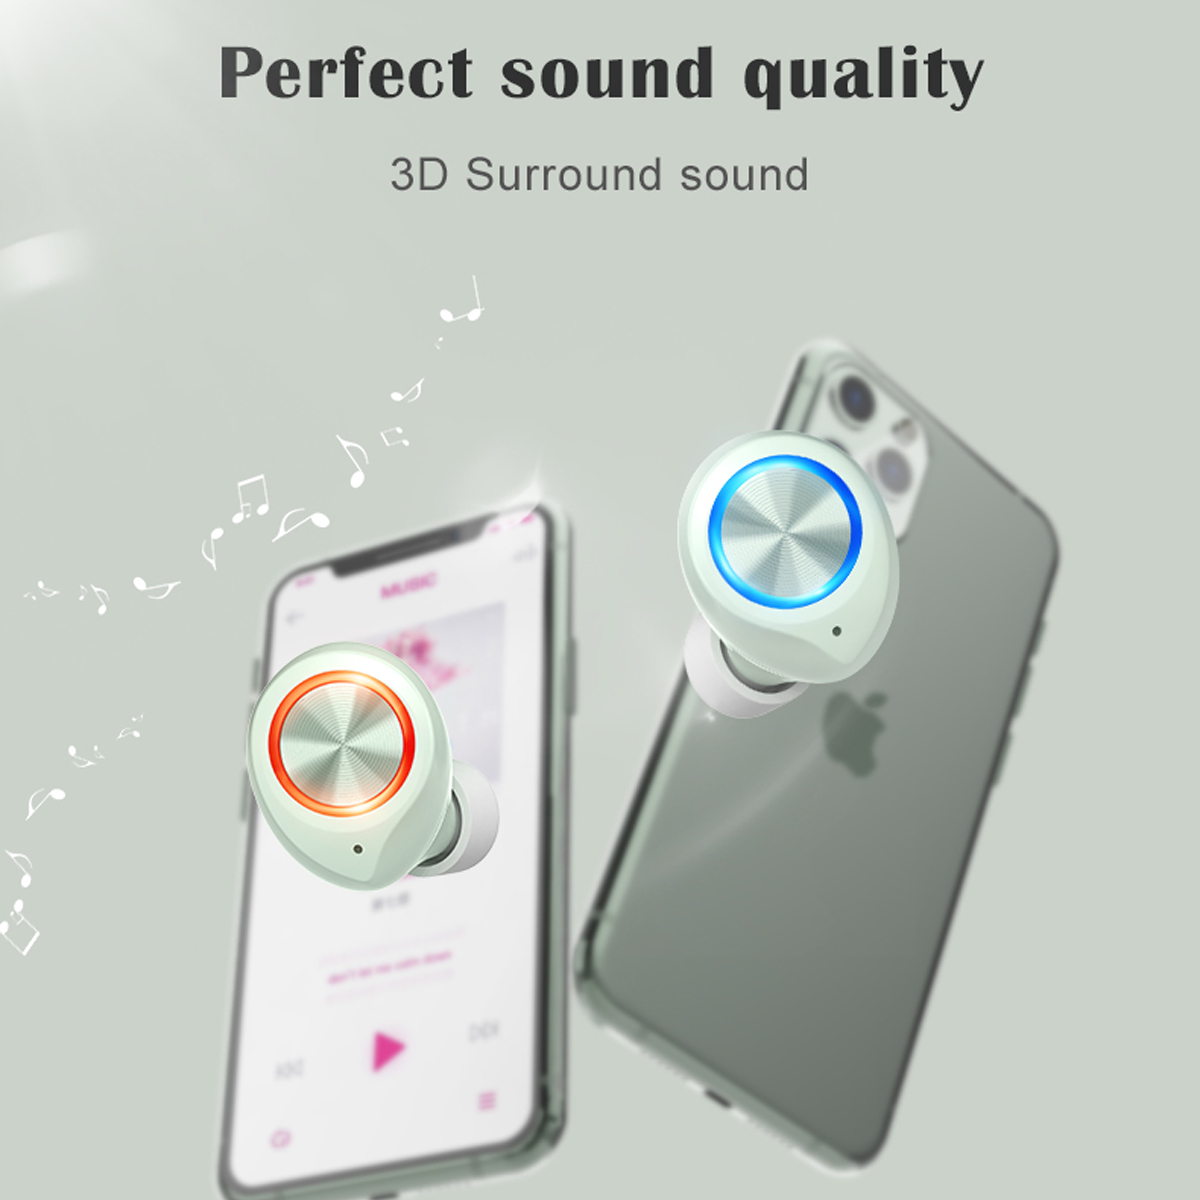 TW70-TWS-bluetooth-50-Earphone-Mini-Stereo-Music-Cute-Earbuds-Smart-Touch-Headphone-with-Mic-Gift-1638439-4